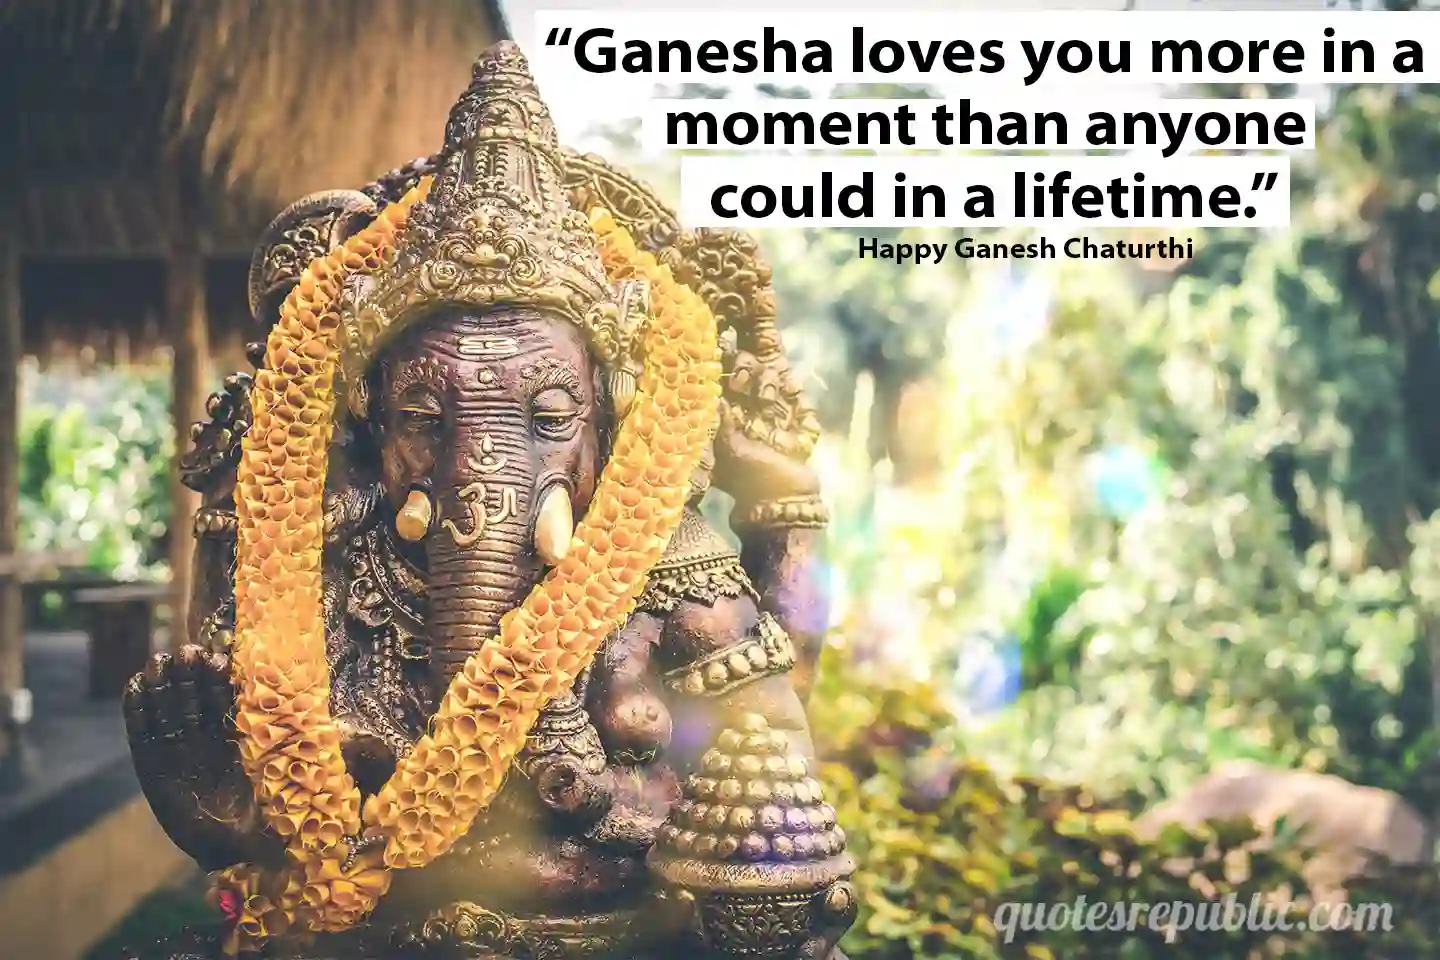 Quotes For Ganesh Chaturthi